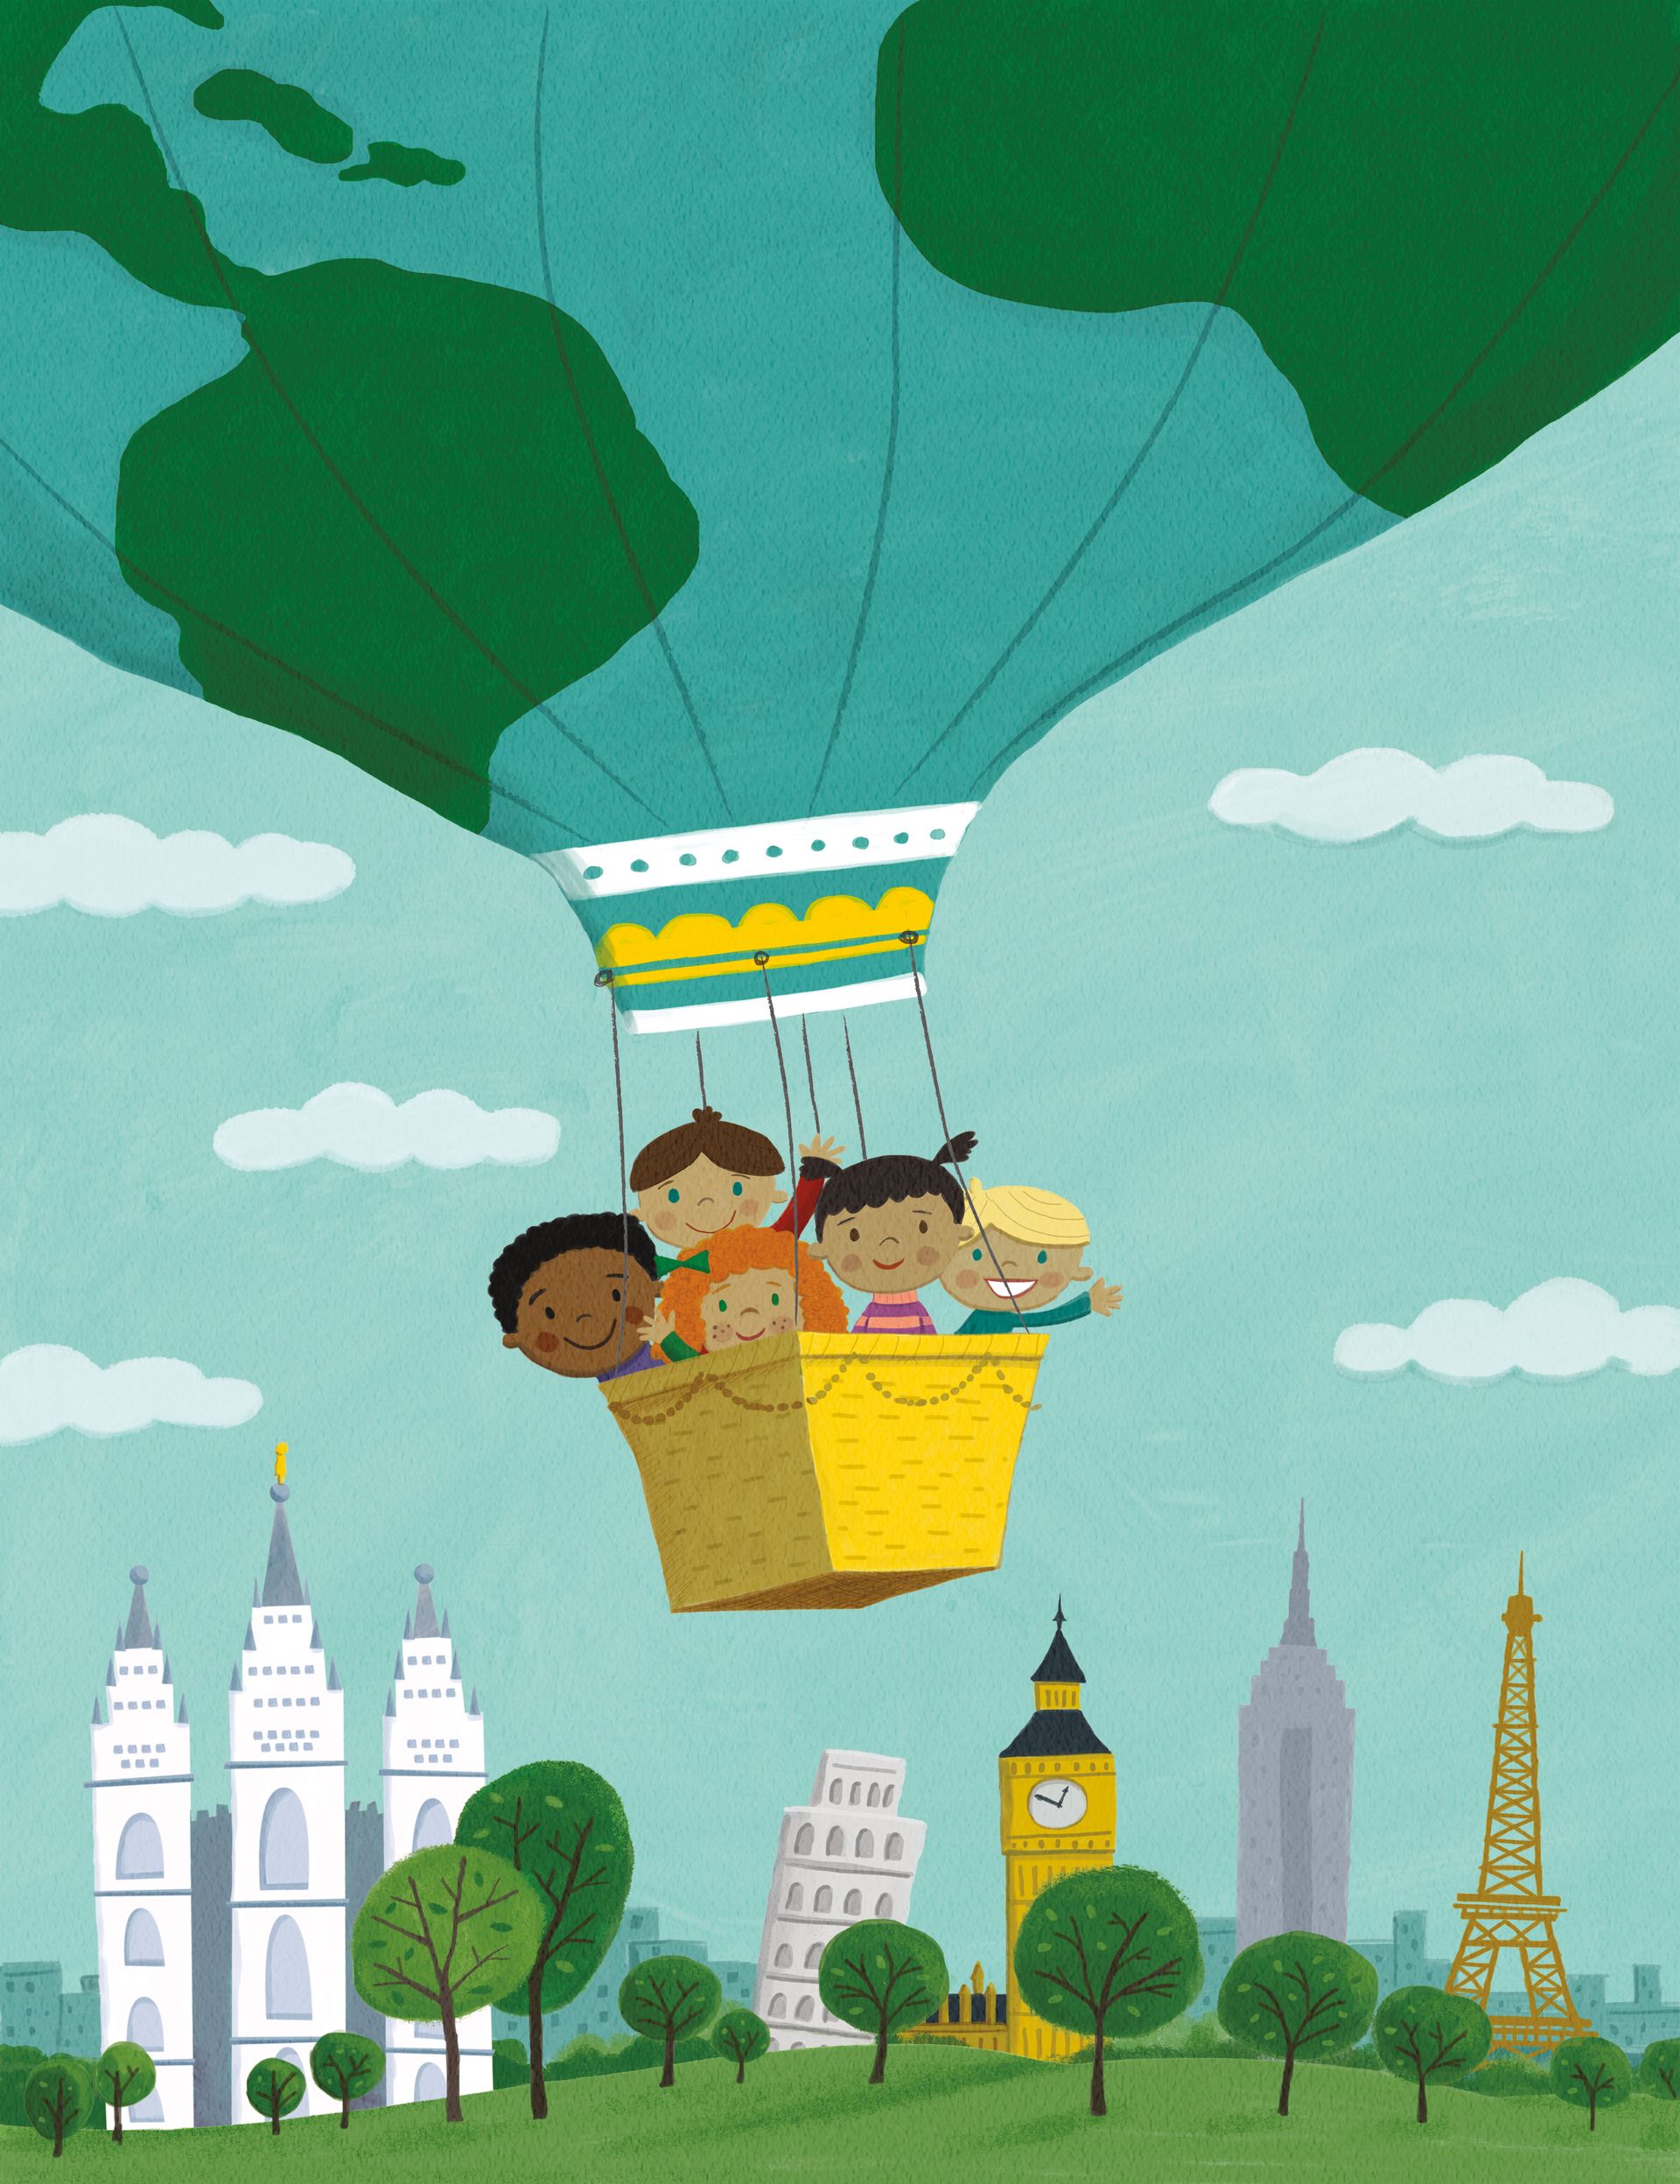 A group of children fly in a hot air balloon with famous monuments below them.